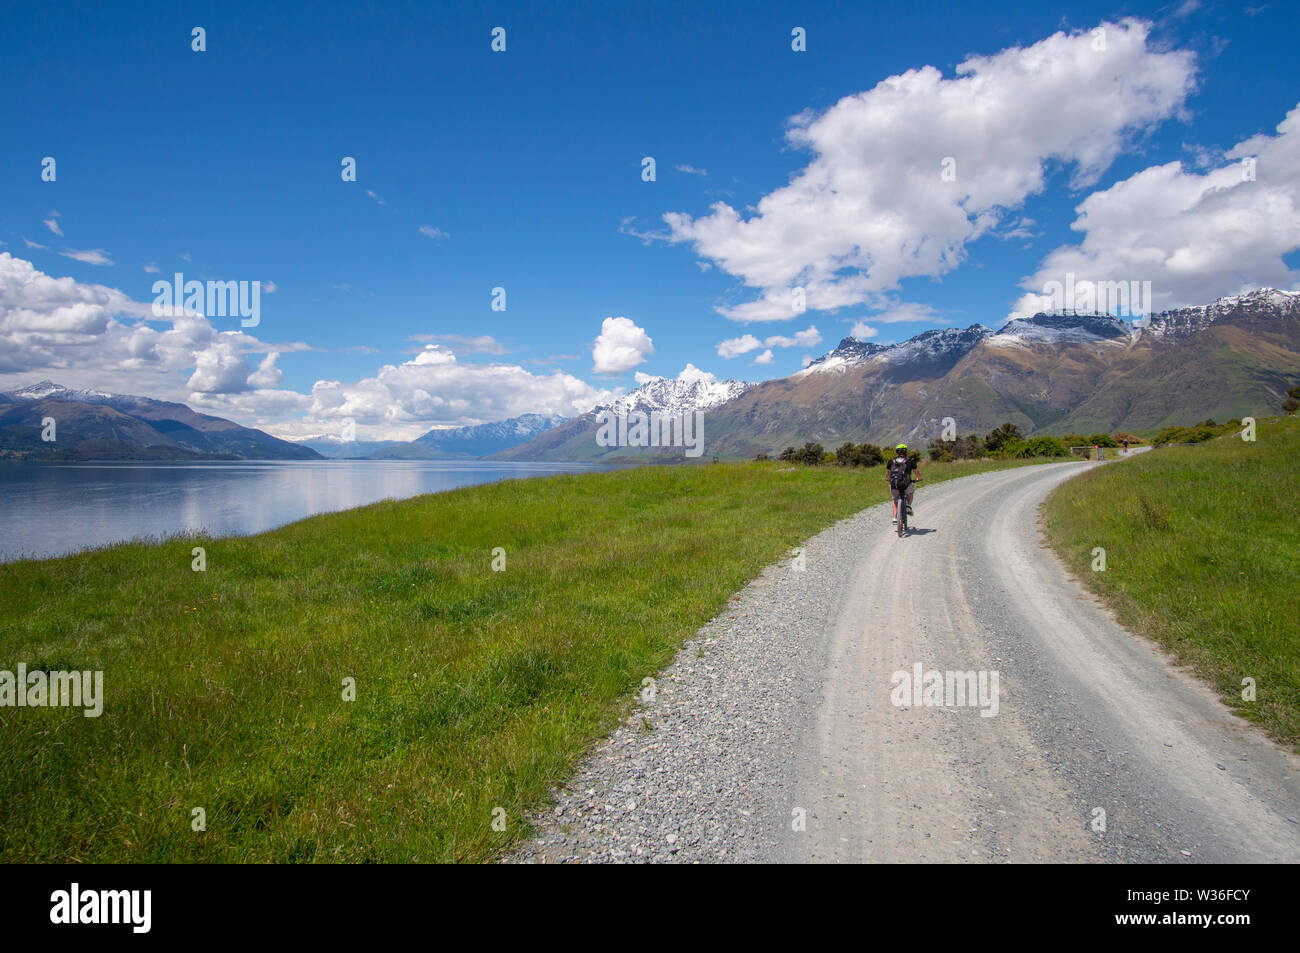 Dirt road through Farmland on shores of Lake Wakatipu near Queenstown, New Zealand for part of the Station to Station cycle trail. Stock Photo